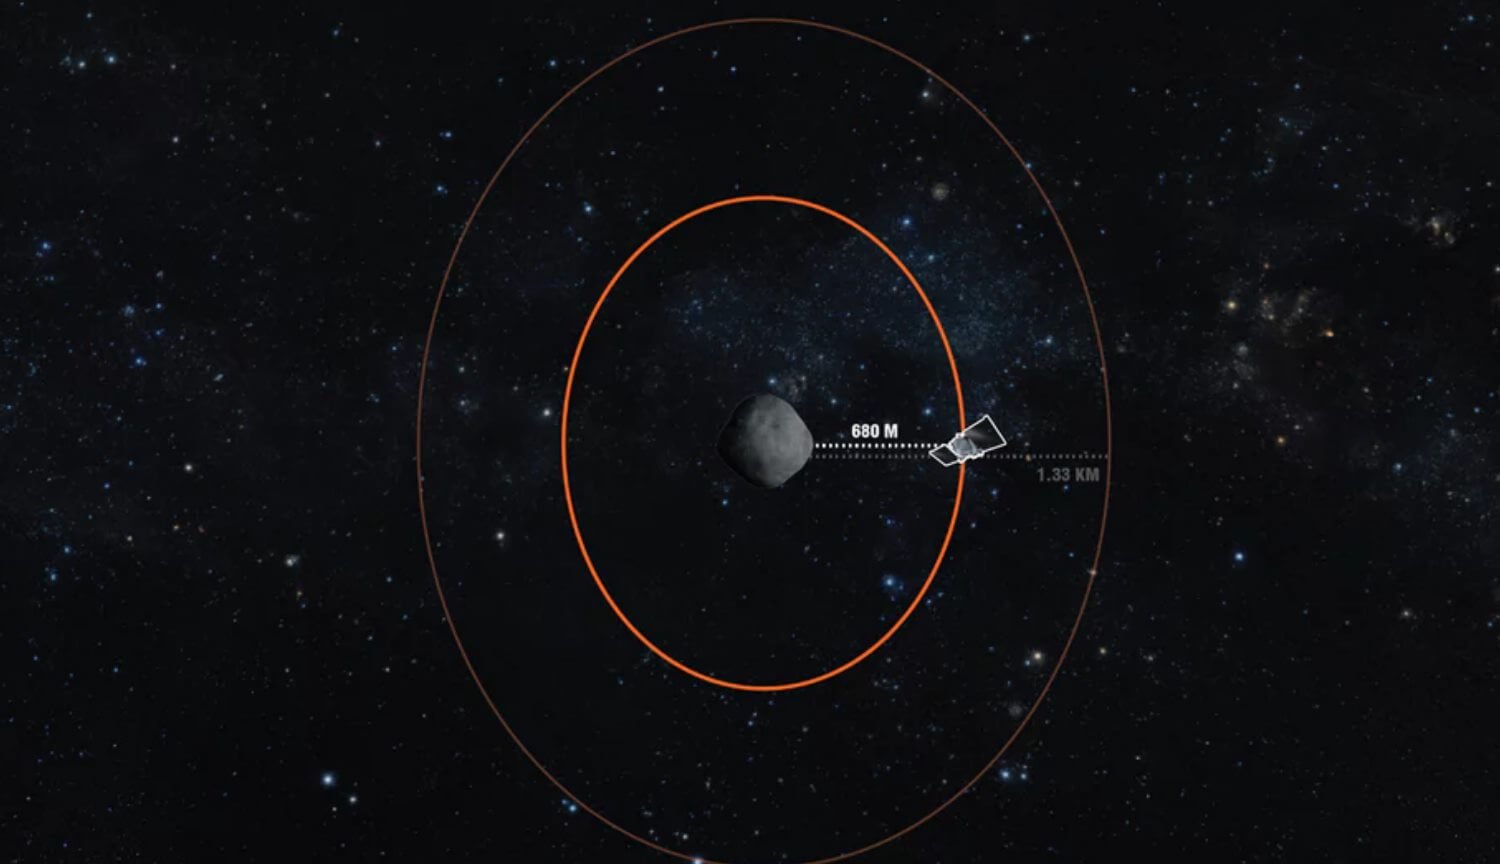 The apparatus of the OSIRIS-REx approached the asteroid Bennu at a record close distance